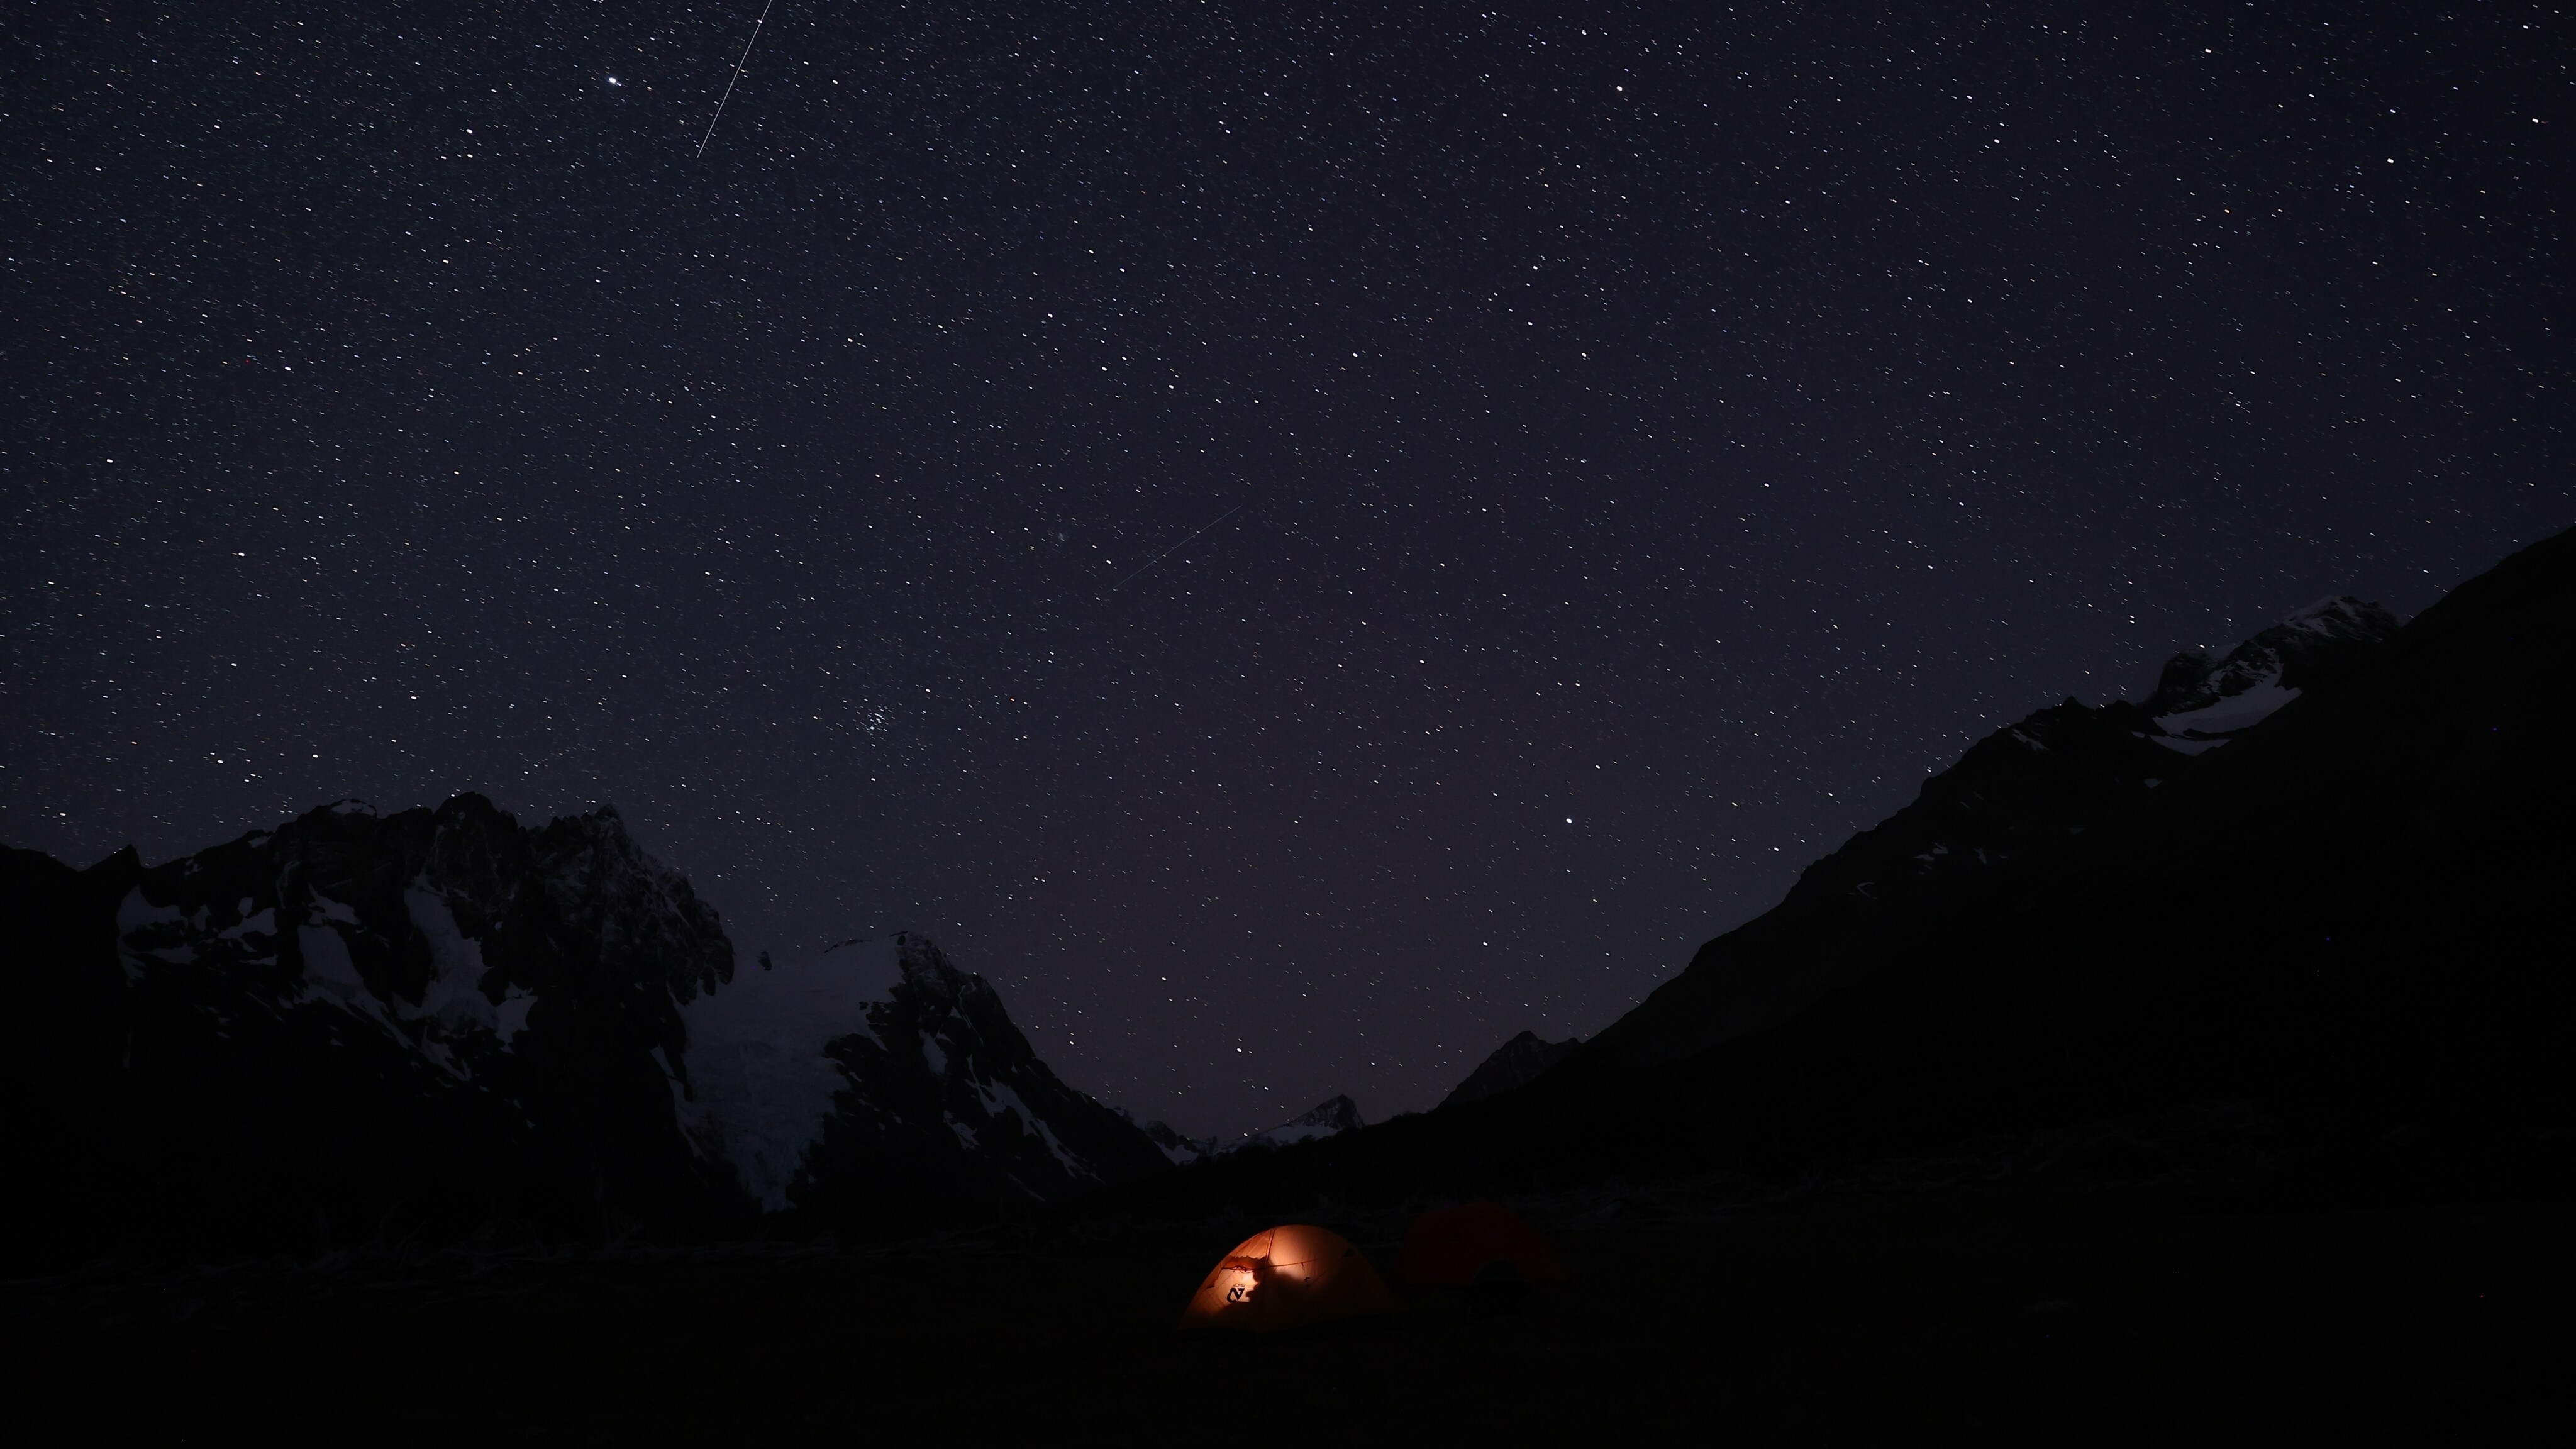 A starry night sky shown above small tent illuminated by an occupant. (Jimmy Chin)